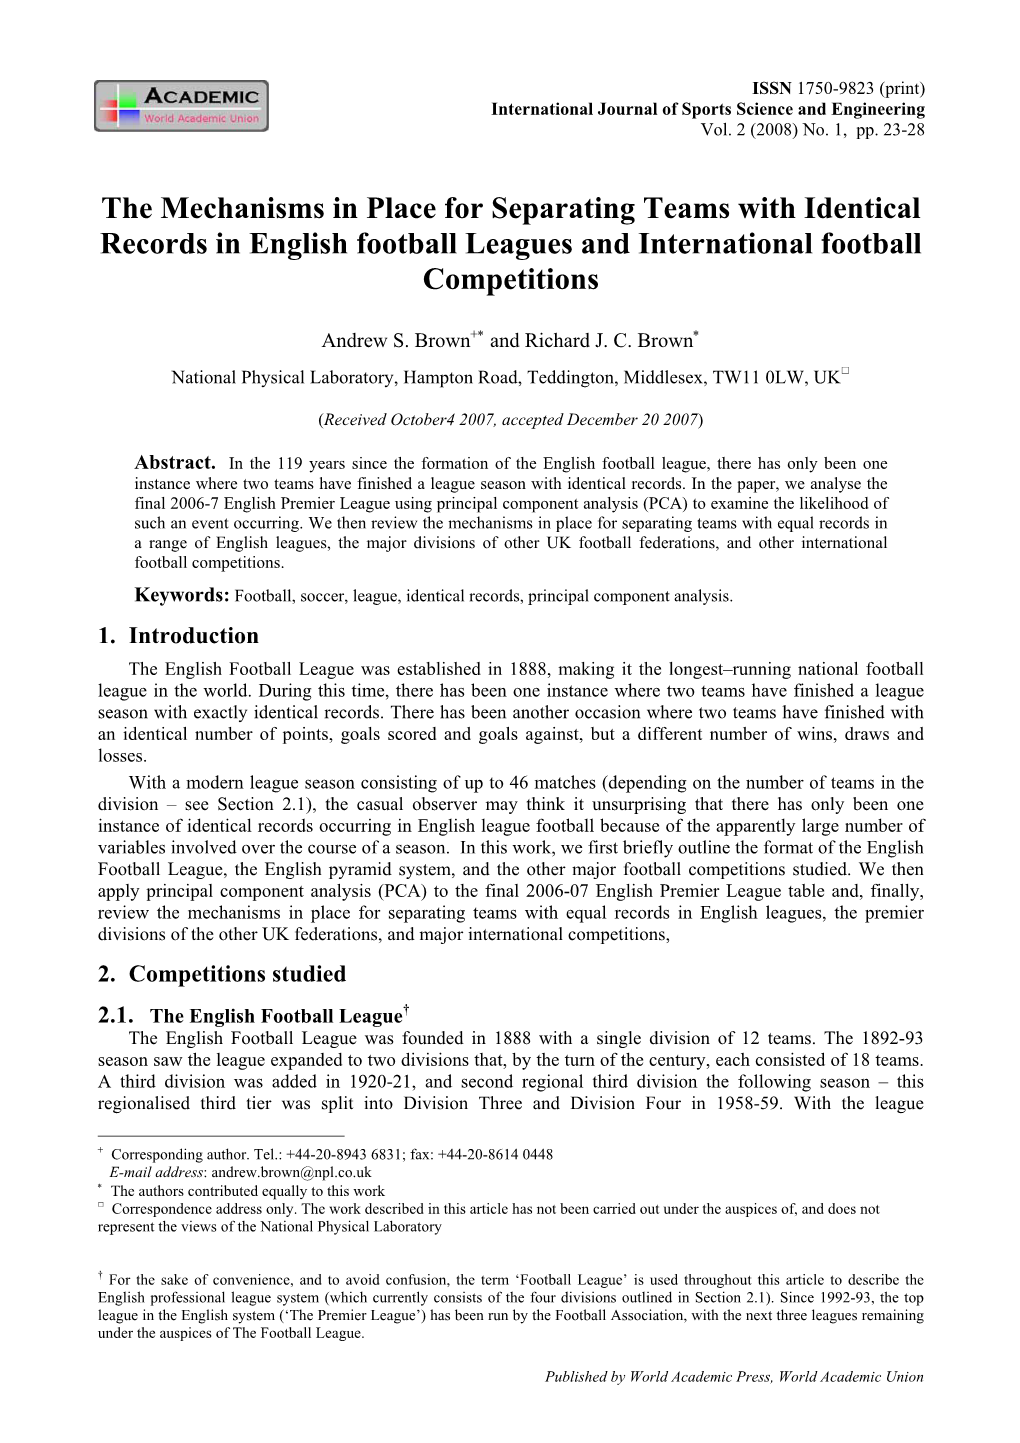 The Mechanisms in Place for Separating Teams with Identical Records in English Football Leagues and International Football Competitions